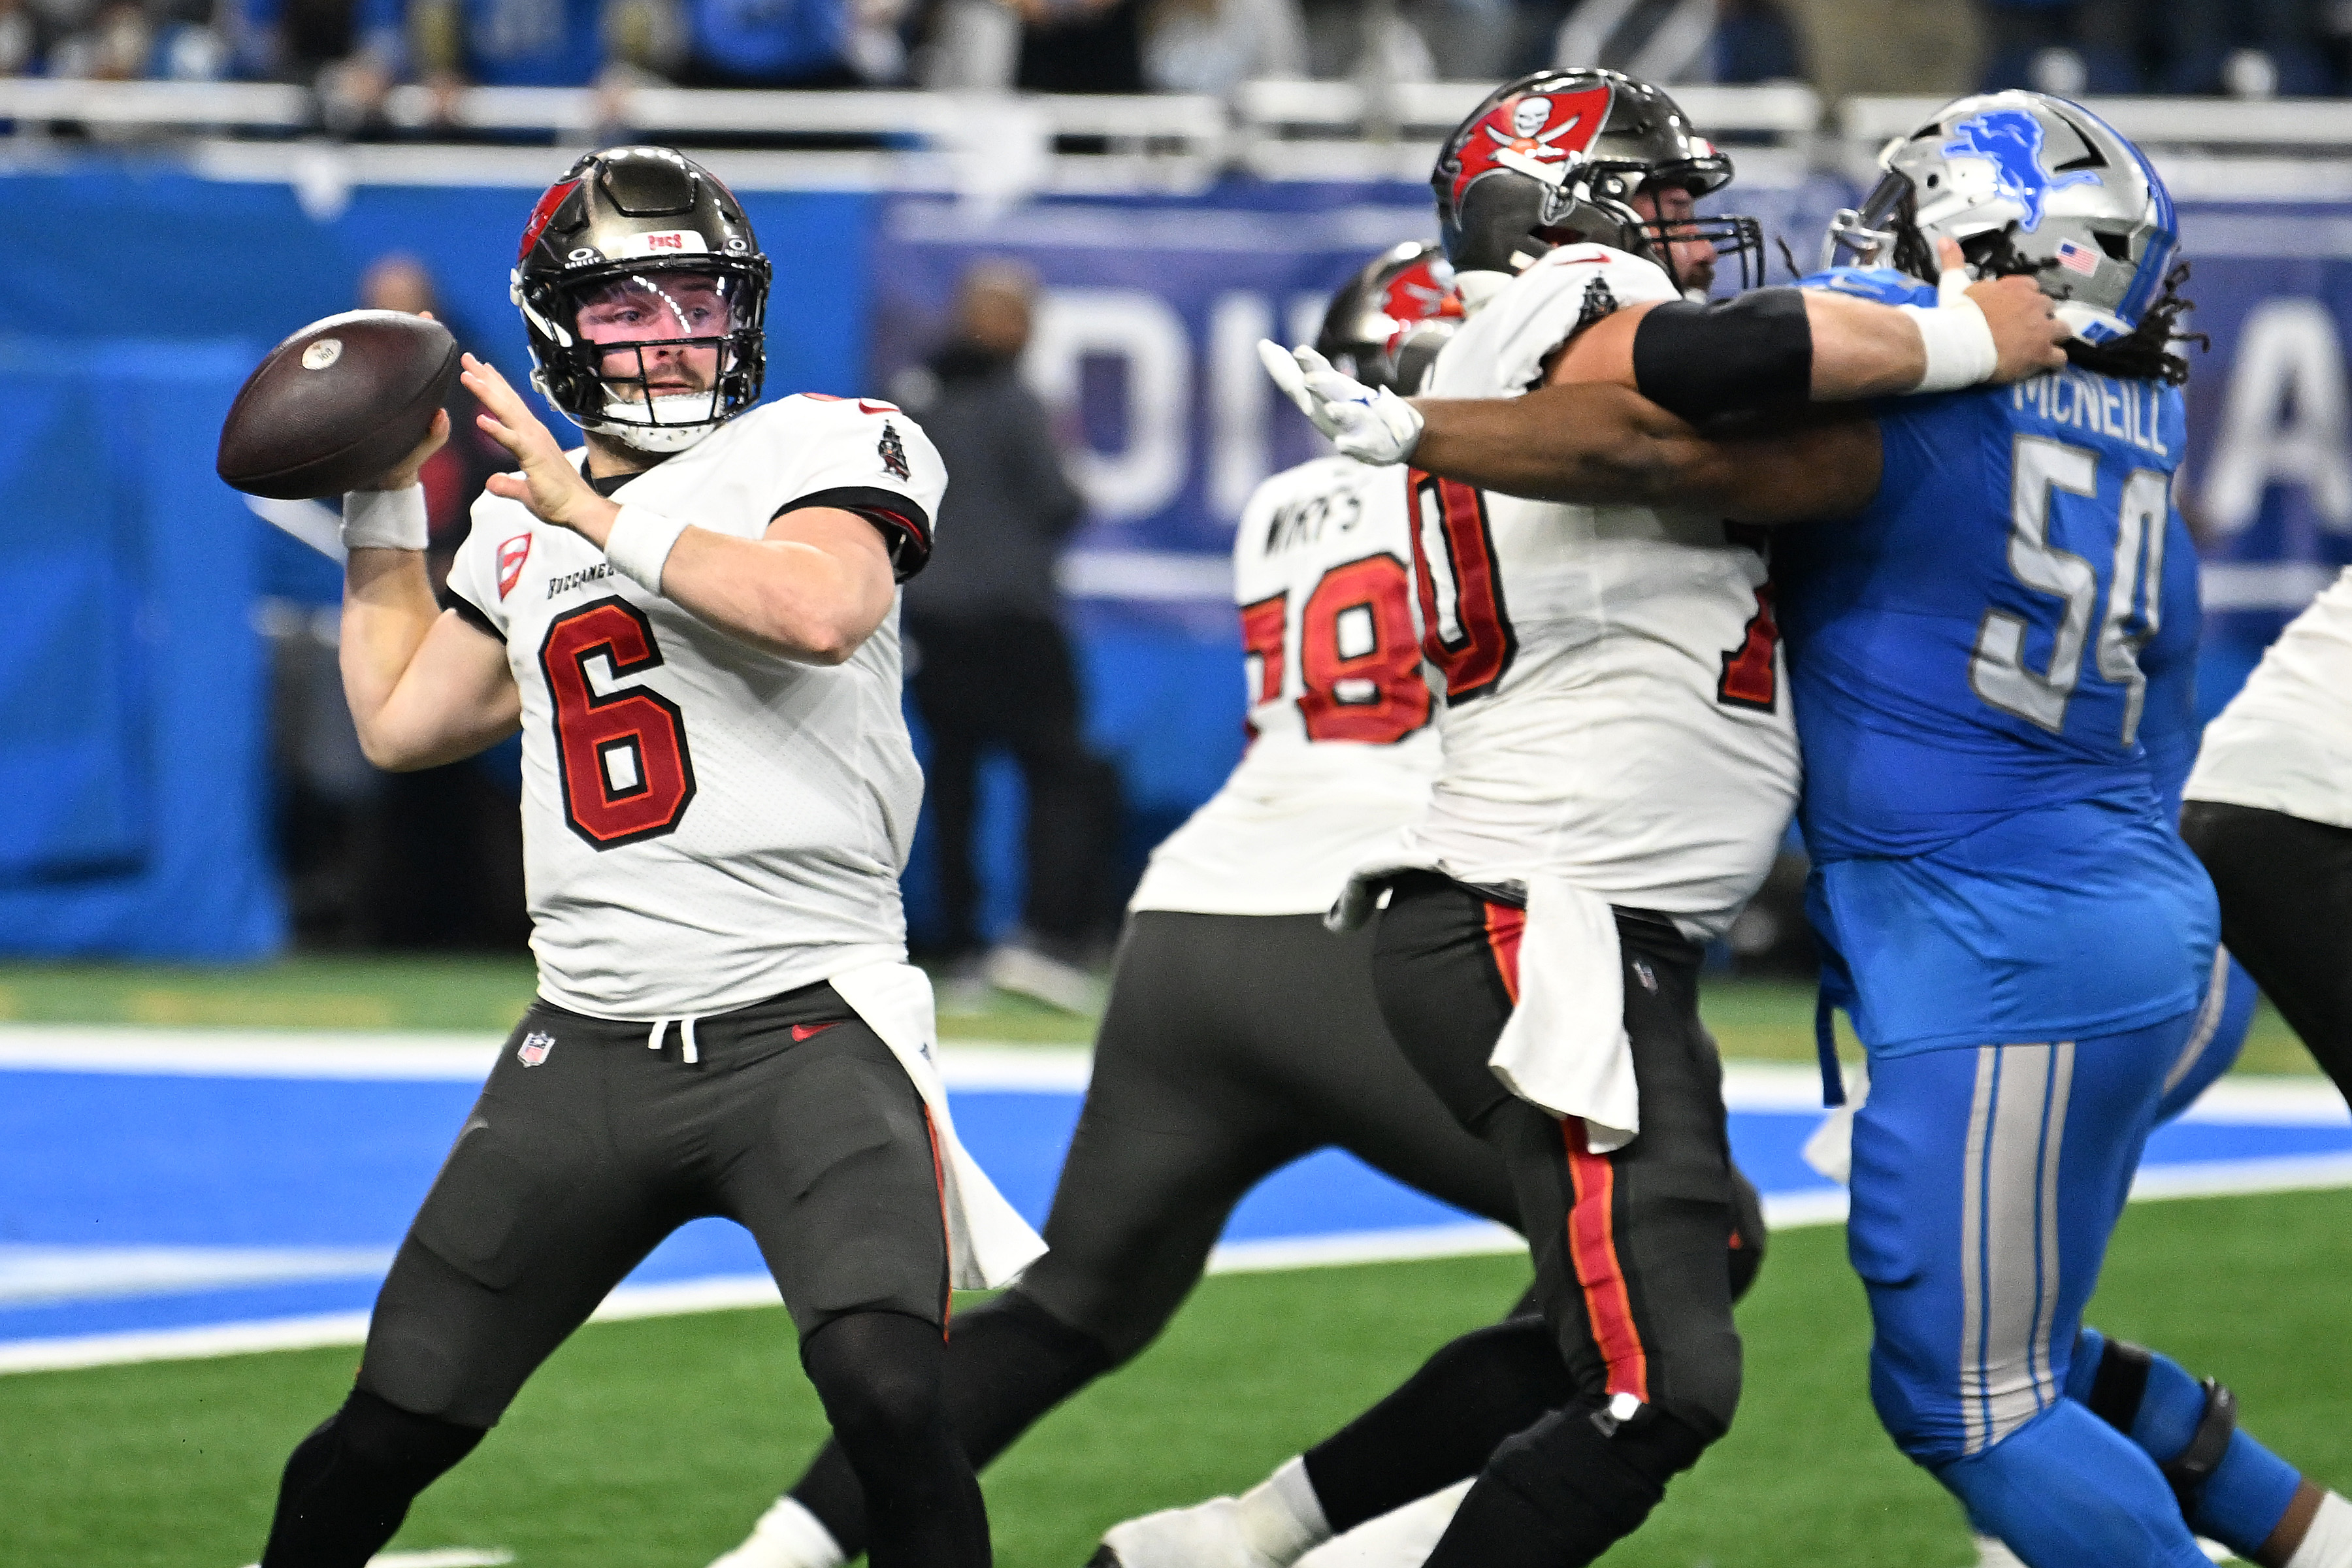 NFL: NFC Divisional Round-Tampa Bay Buccaneers at Detroit Lions